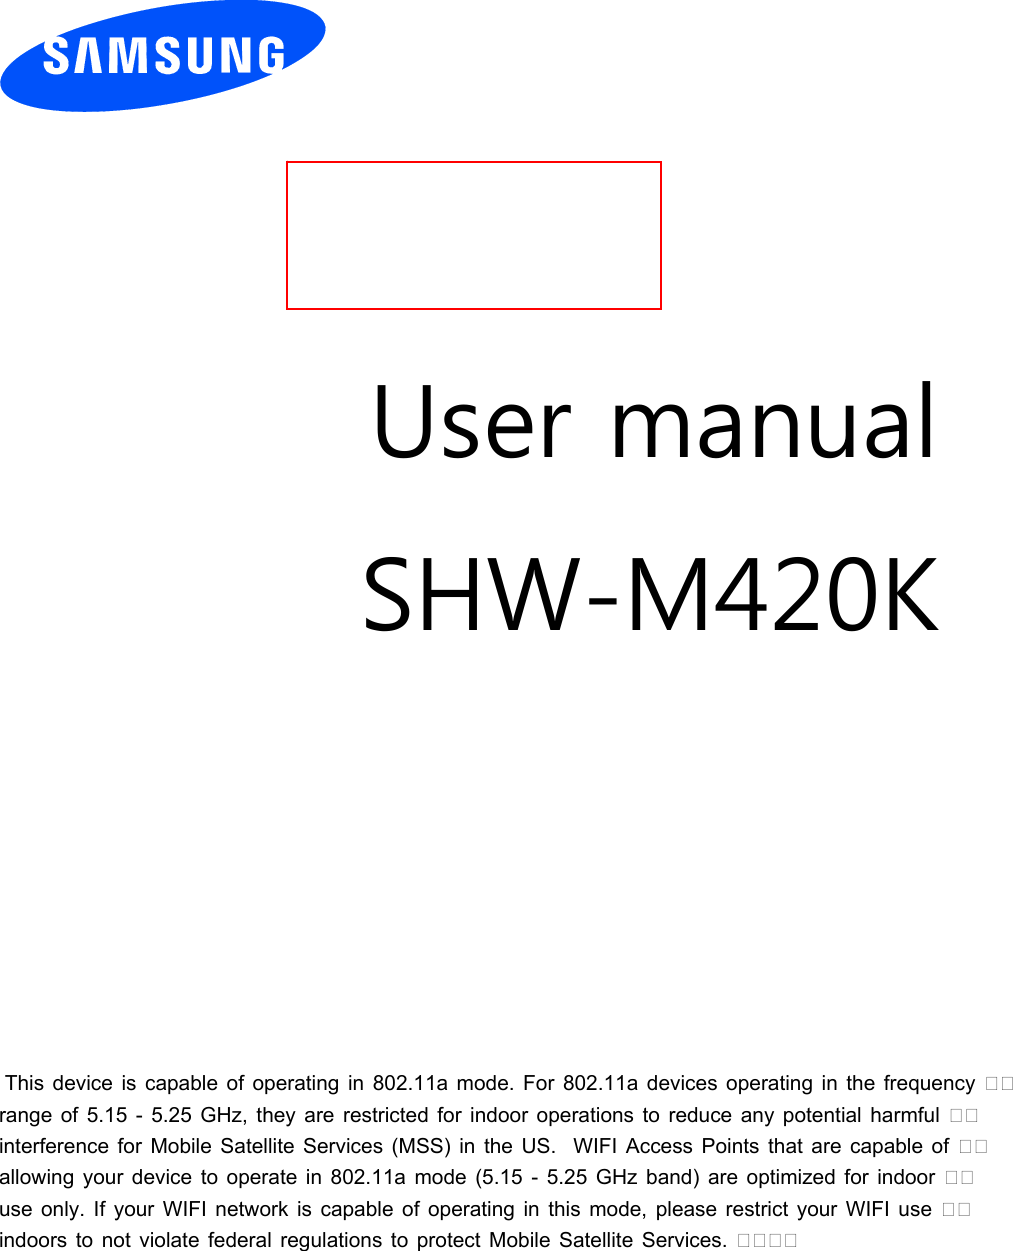          User manual SHW-M420K             This device is capable of operating in 802.11a mode. For 802.11a devices operating in the frequency range of 5.15 - 5.25 GHz, they are restricted for indoor operations to reduce any potential harmful interference for Mobile Satellite Services (MSS) in the US.  WIFI Access Points that are capable of allowing your device to operate in 802.11a mode (5.15 - 5.25 GHz band) are optimized for indoor use only. If your WIFI network is capable of operating in this mode, please restrict your WIFI use indoors to not violate federal regulations to protect Mobile Satellite Services.      